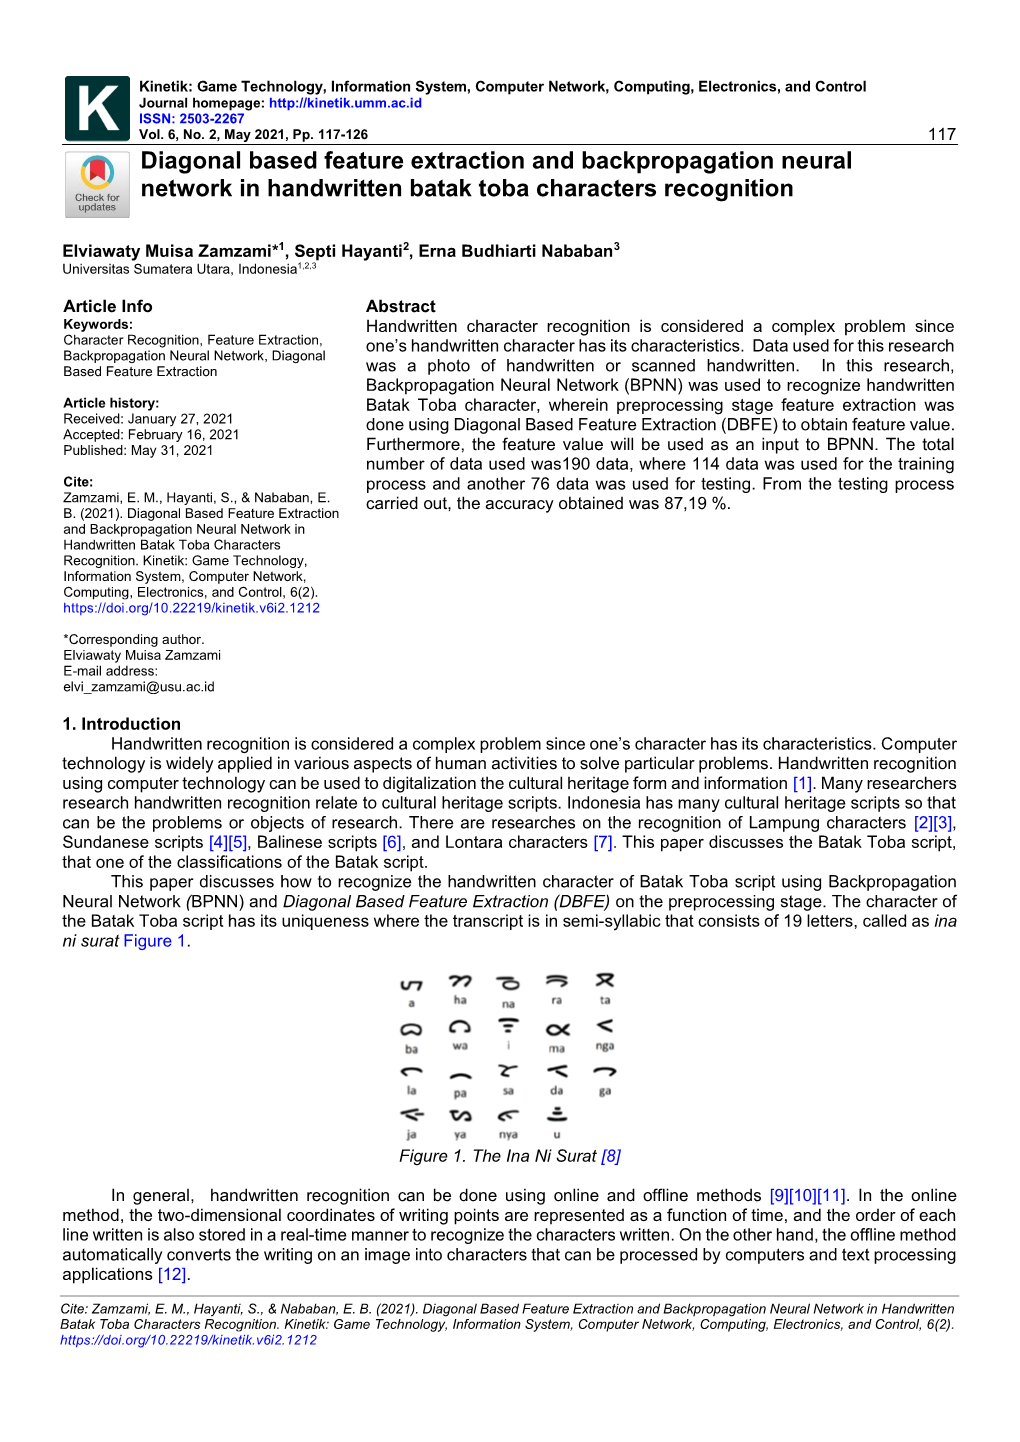 Diagonal Based Feature Extraction and Backpropagation Neural Network in Handwritten Batak Toba Characters Recognition